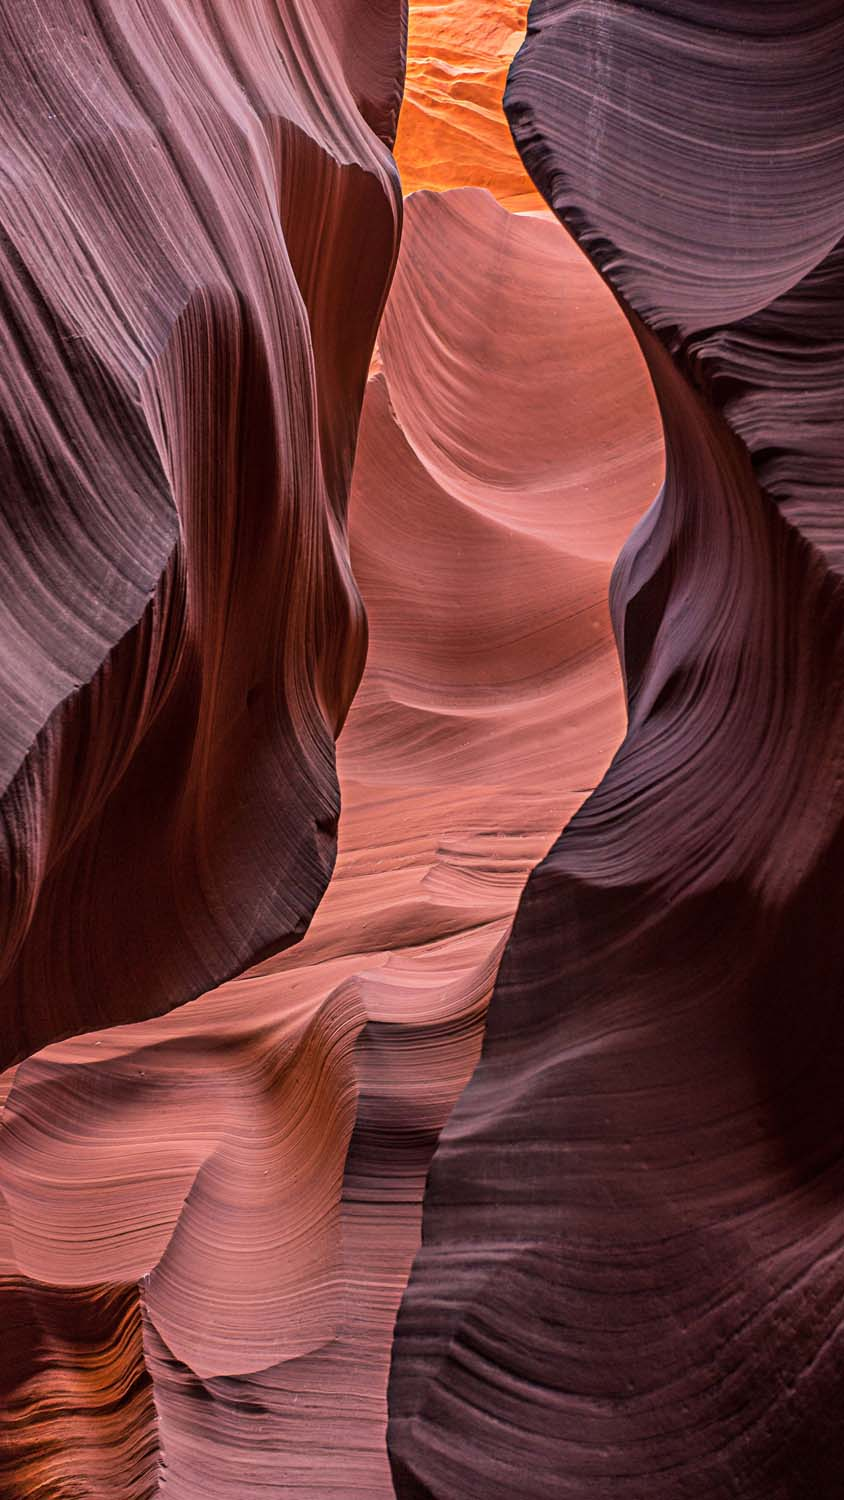 Canyon Cave IPhone Wallpaper HD  IPhone Wallpapers